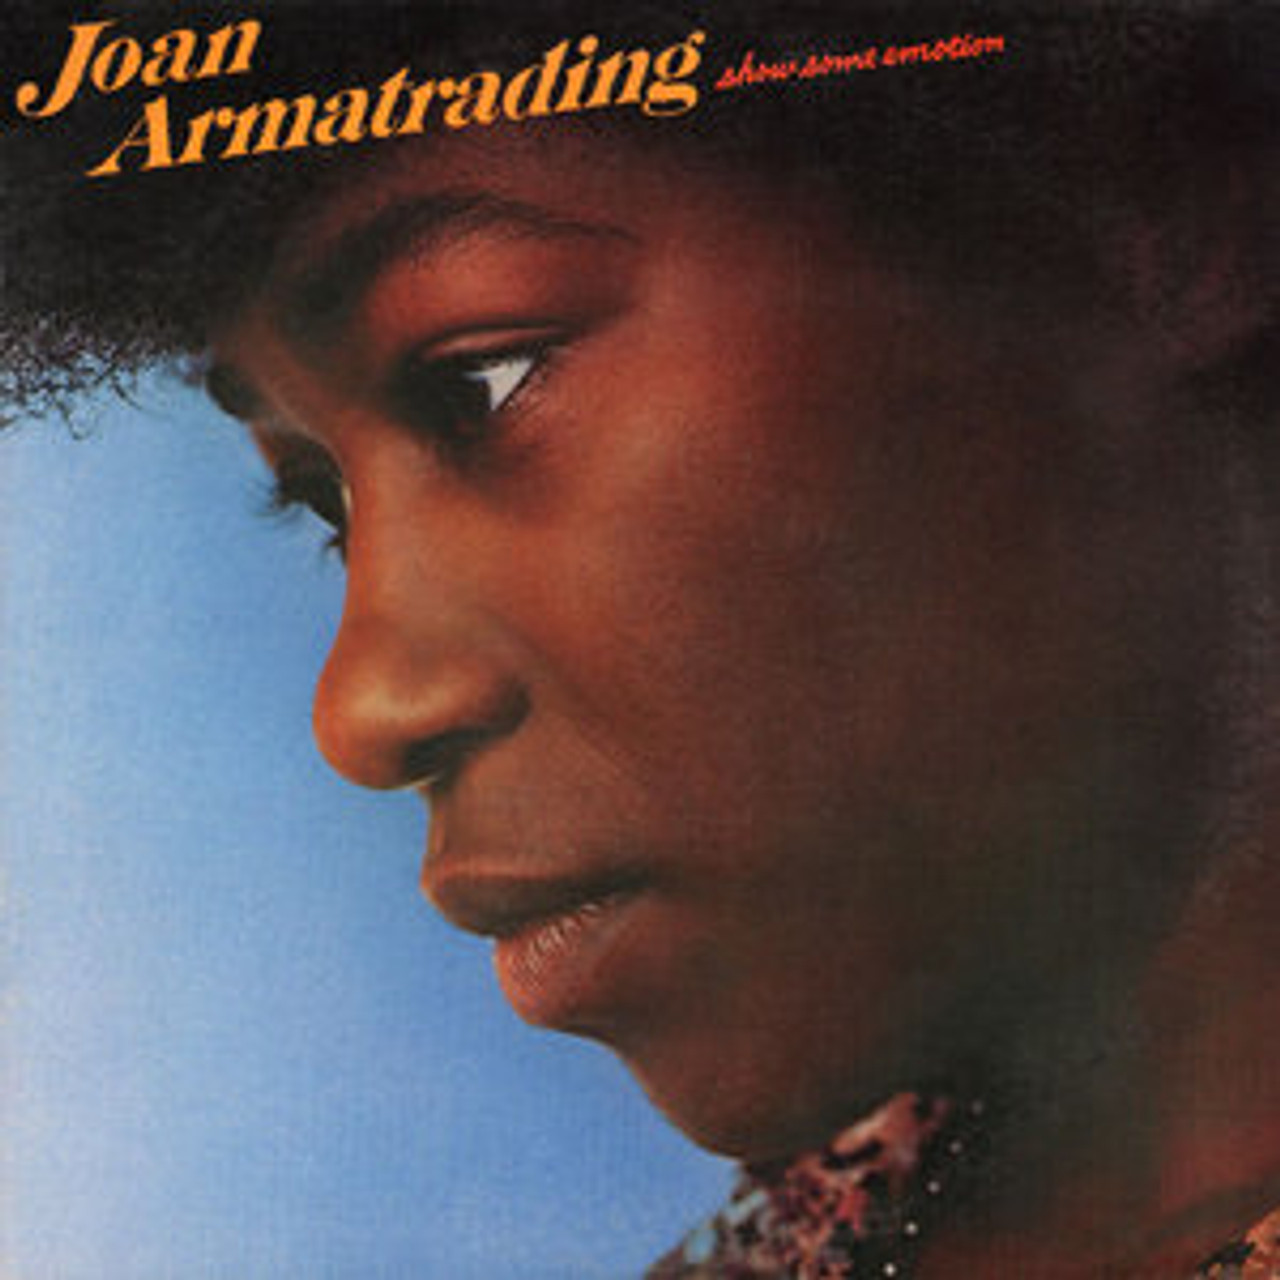 SHOW SOME EMOTION LP [vinyl] by Joan Armatrading - &#39;77 Release Still in  Shrink-Wrap - PlanetMusic33.com